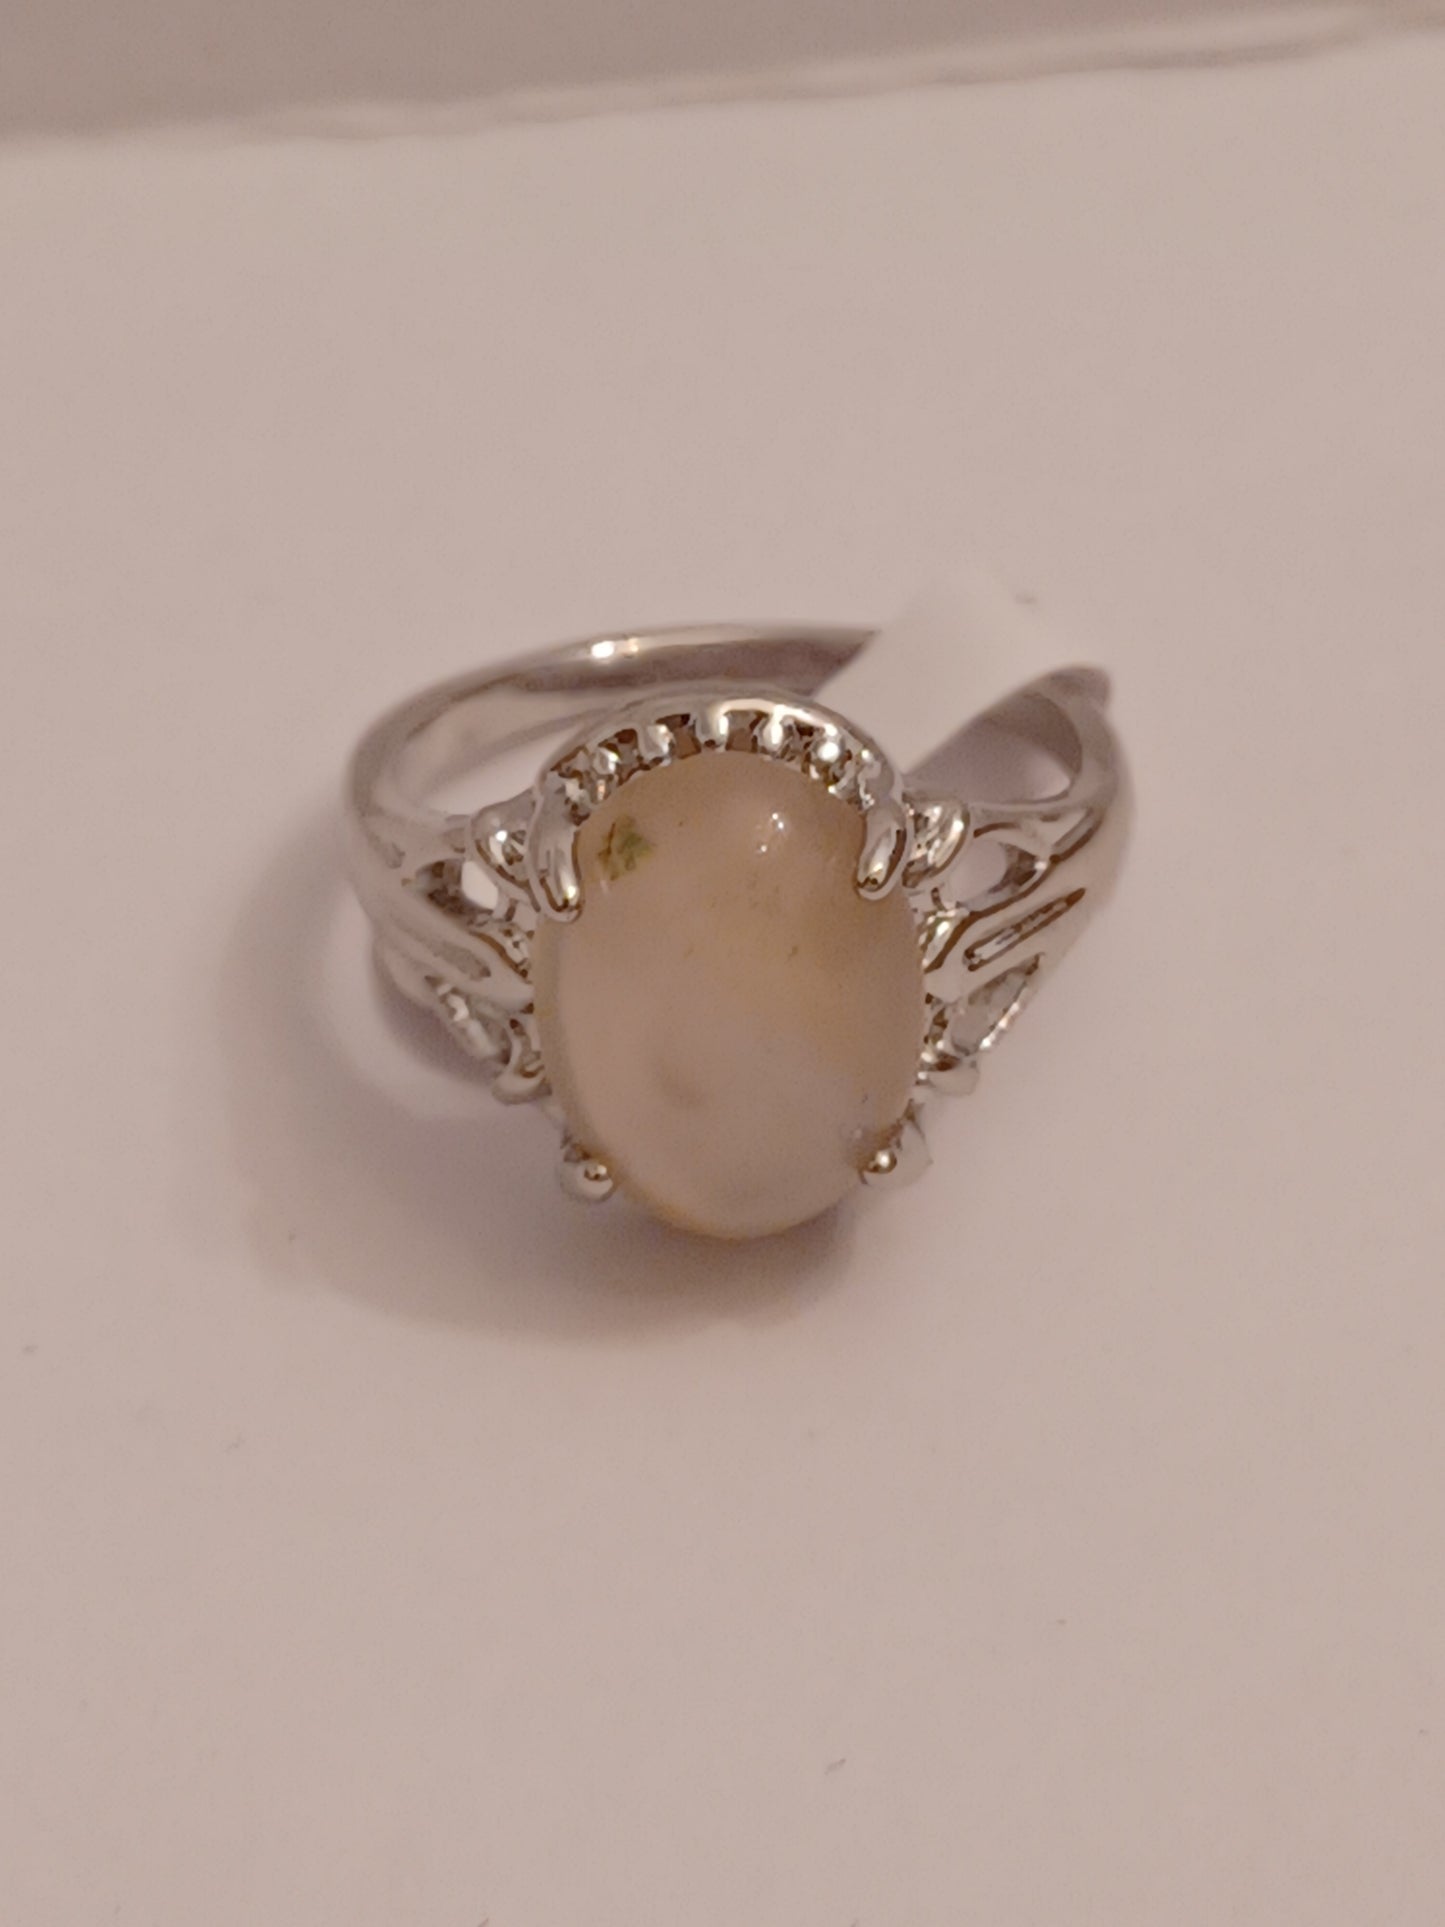 Agate Ring - Size 10